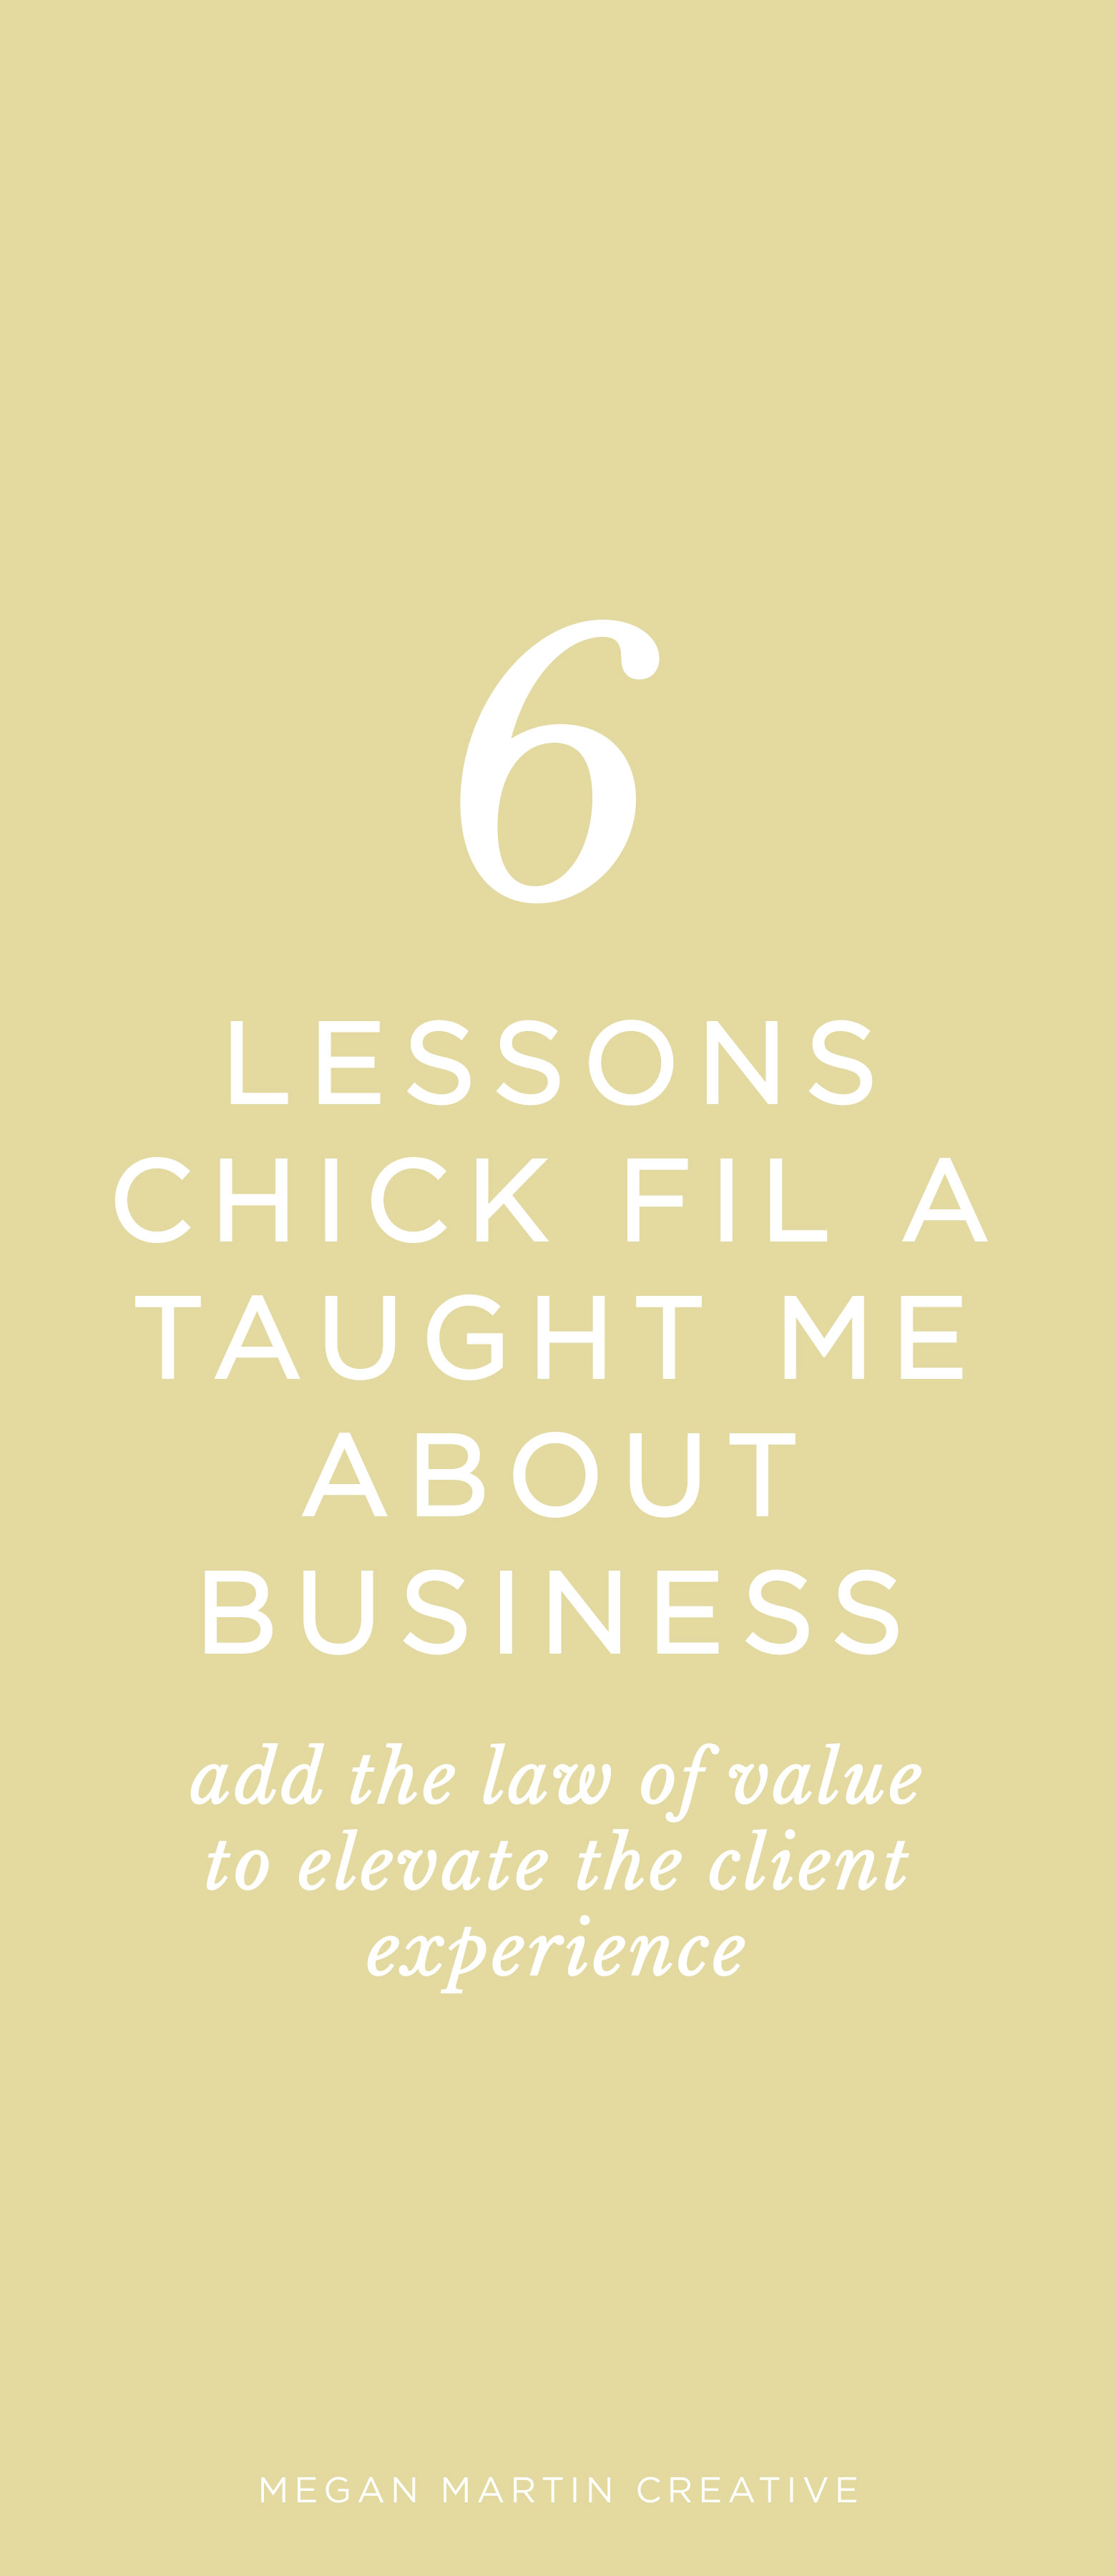 6 business lessons learned from Chick Fil A about the law of value and how to elevate your client experience!